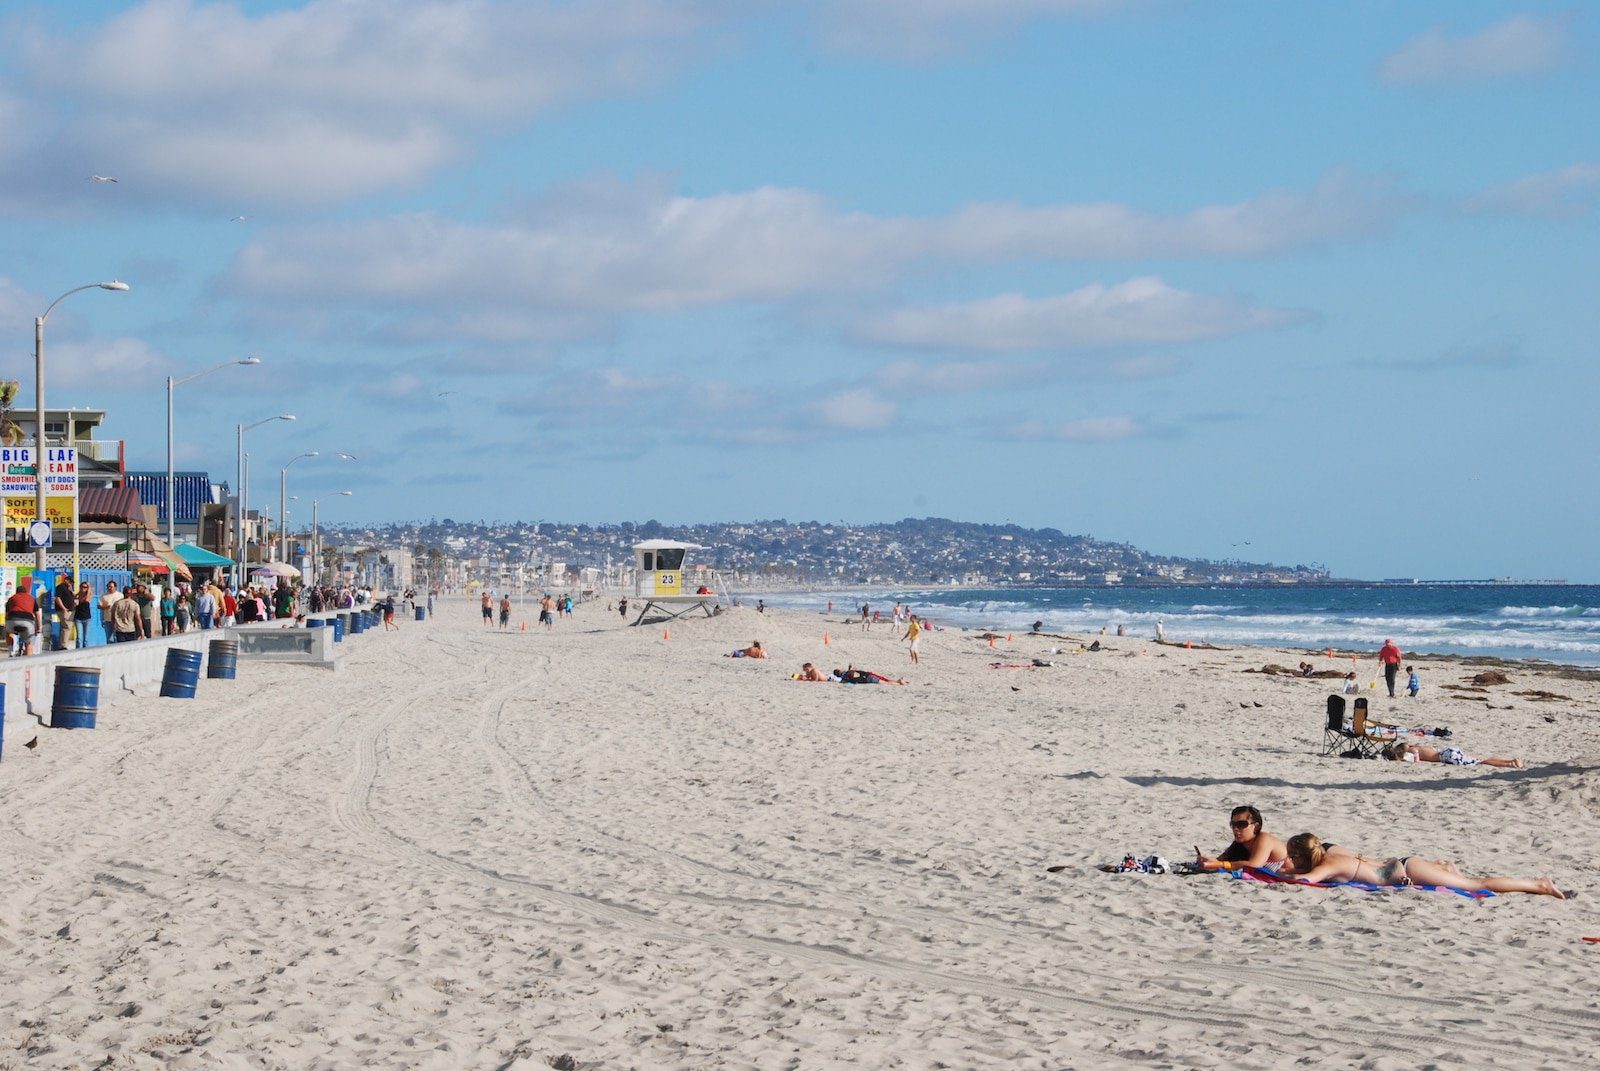 Image of tourists at Mission Beach, San Diego